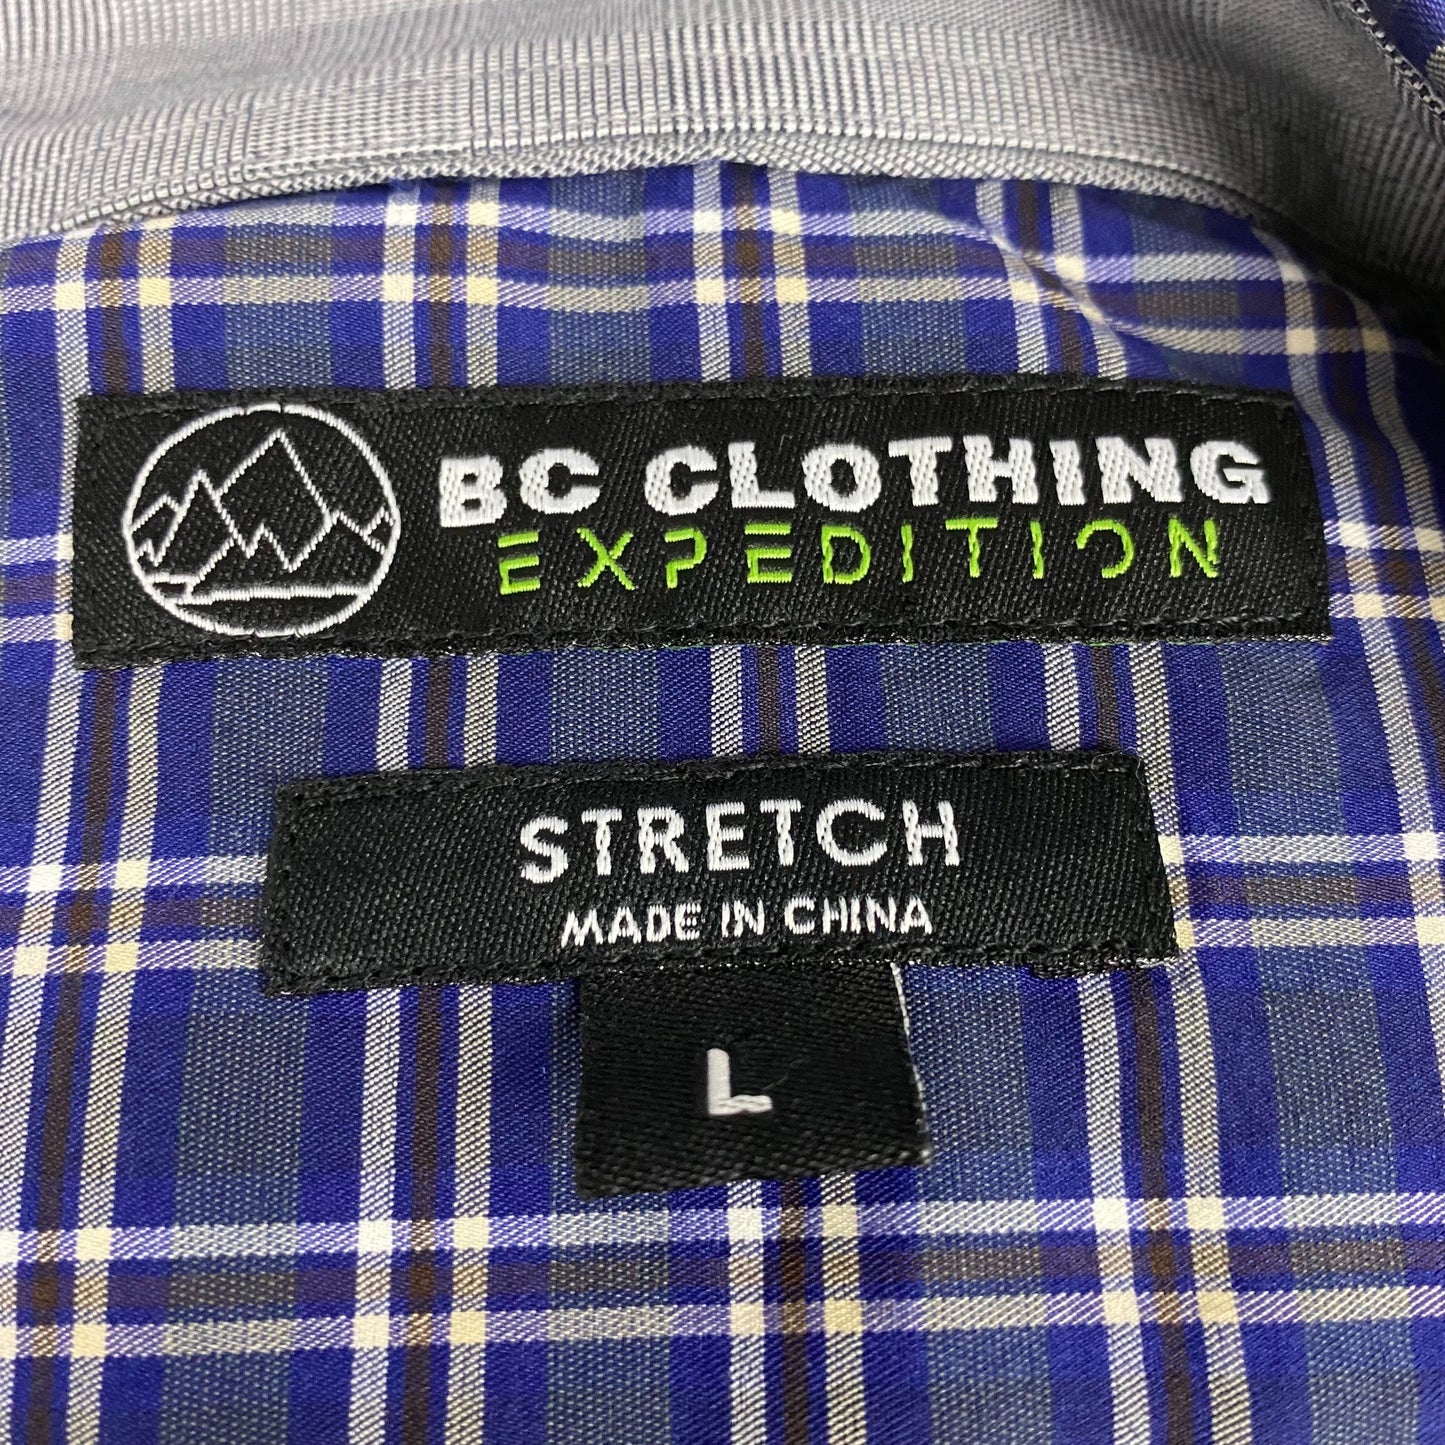 BC Clothing Expedition "Stretch" Long Sleeve Button Up Shirt (L)